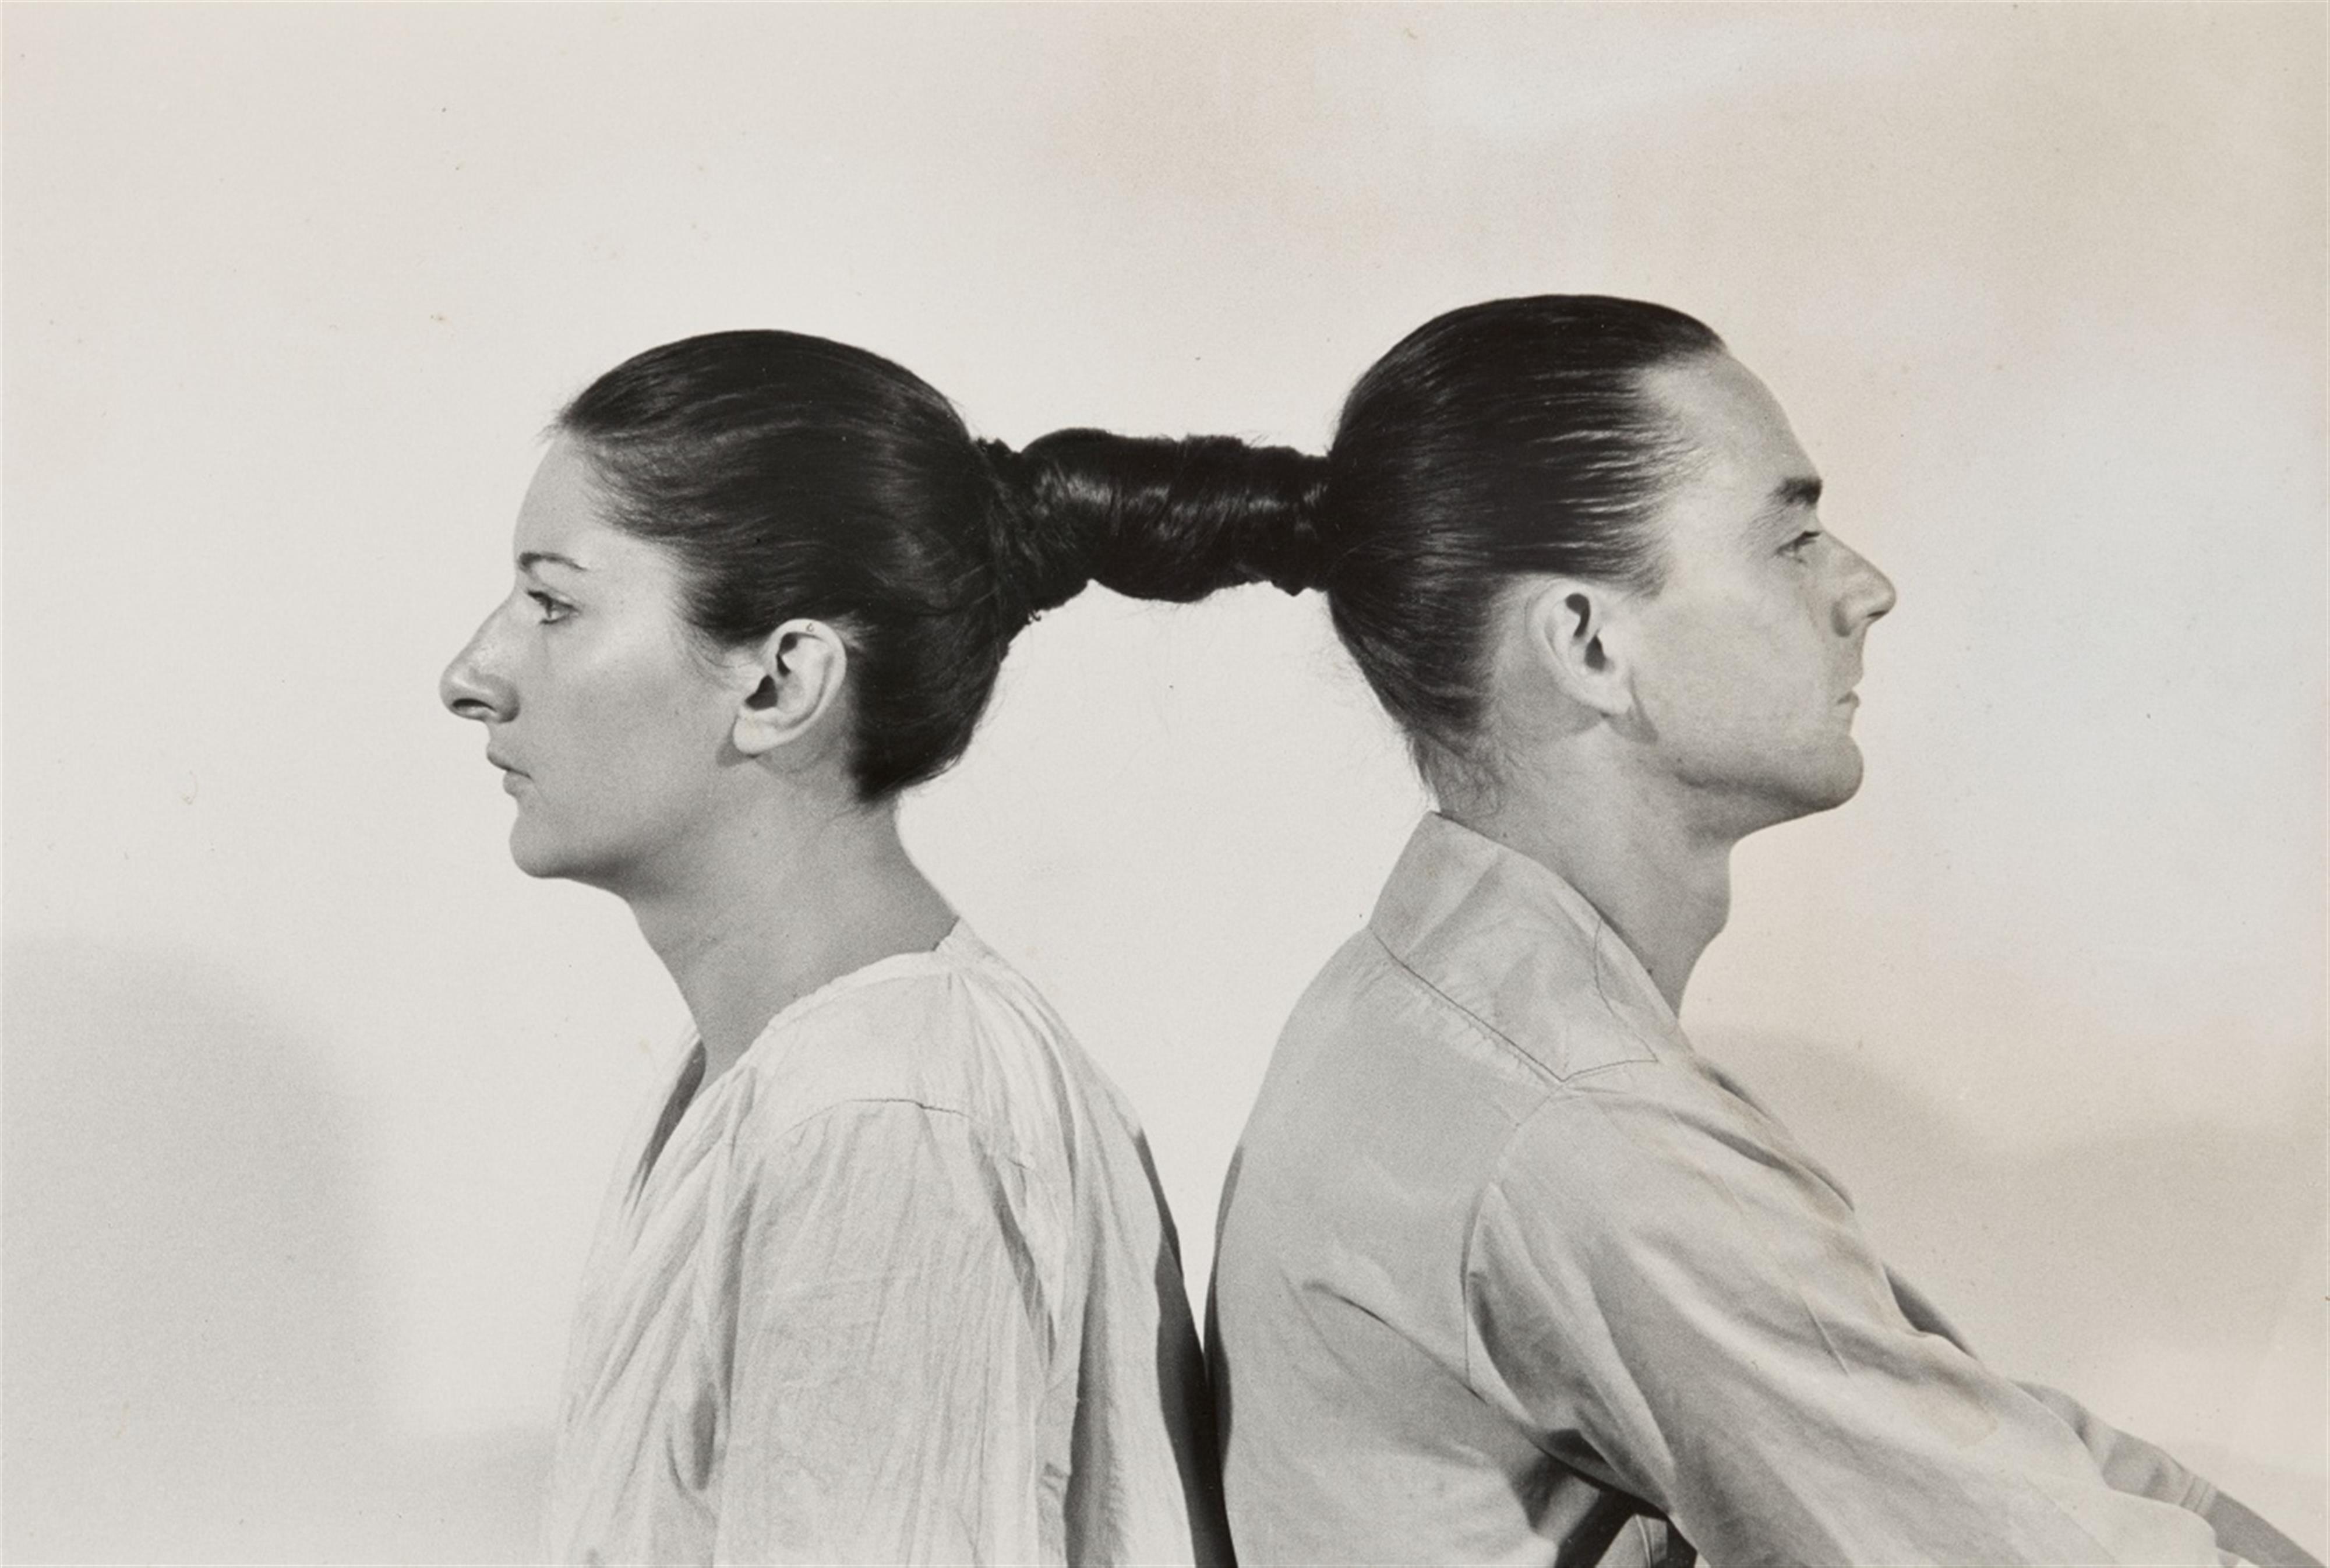 Marina Abramovic
Ulay - Relation in Time - image-1